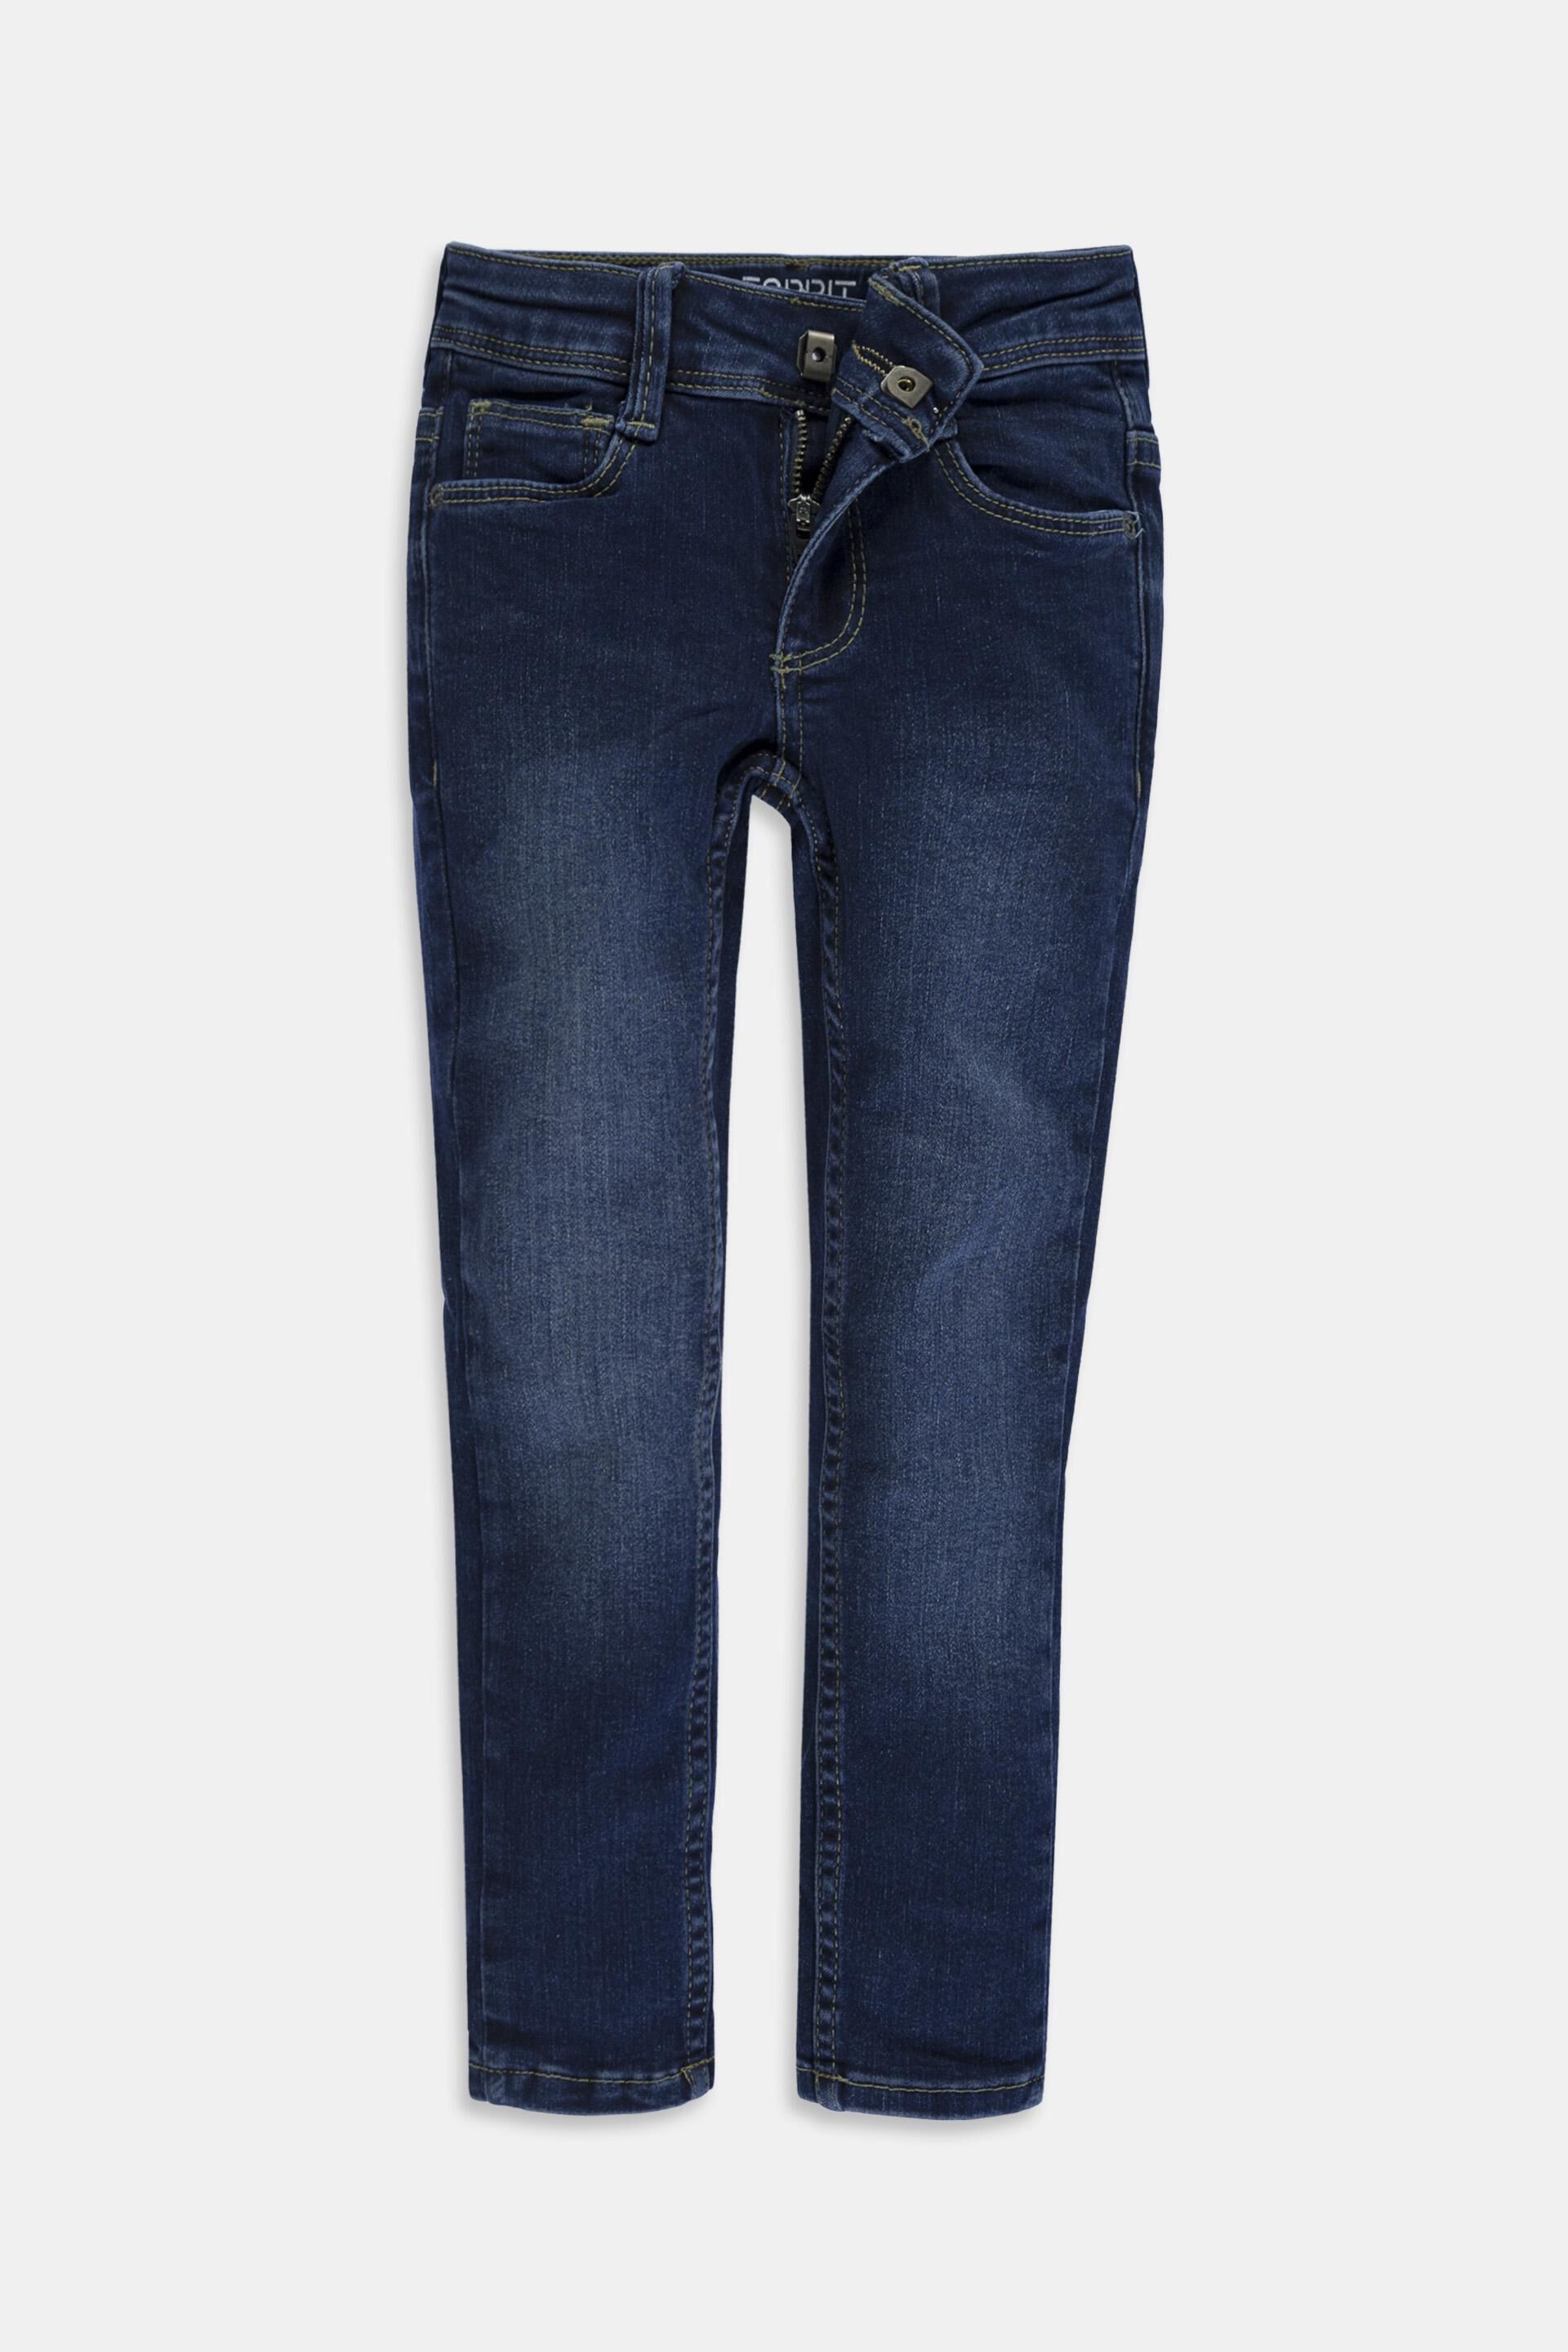 Esprit Stretch with in an waistband available jeans widths adjustable different